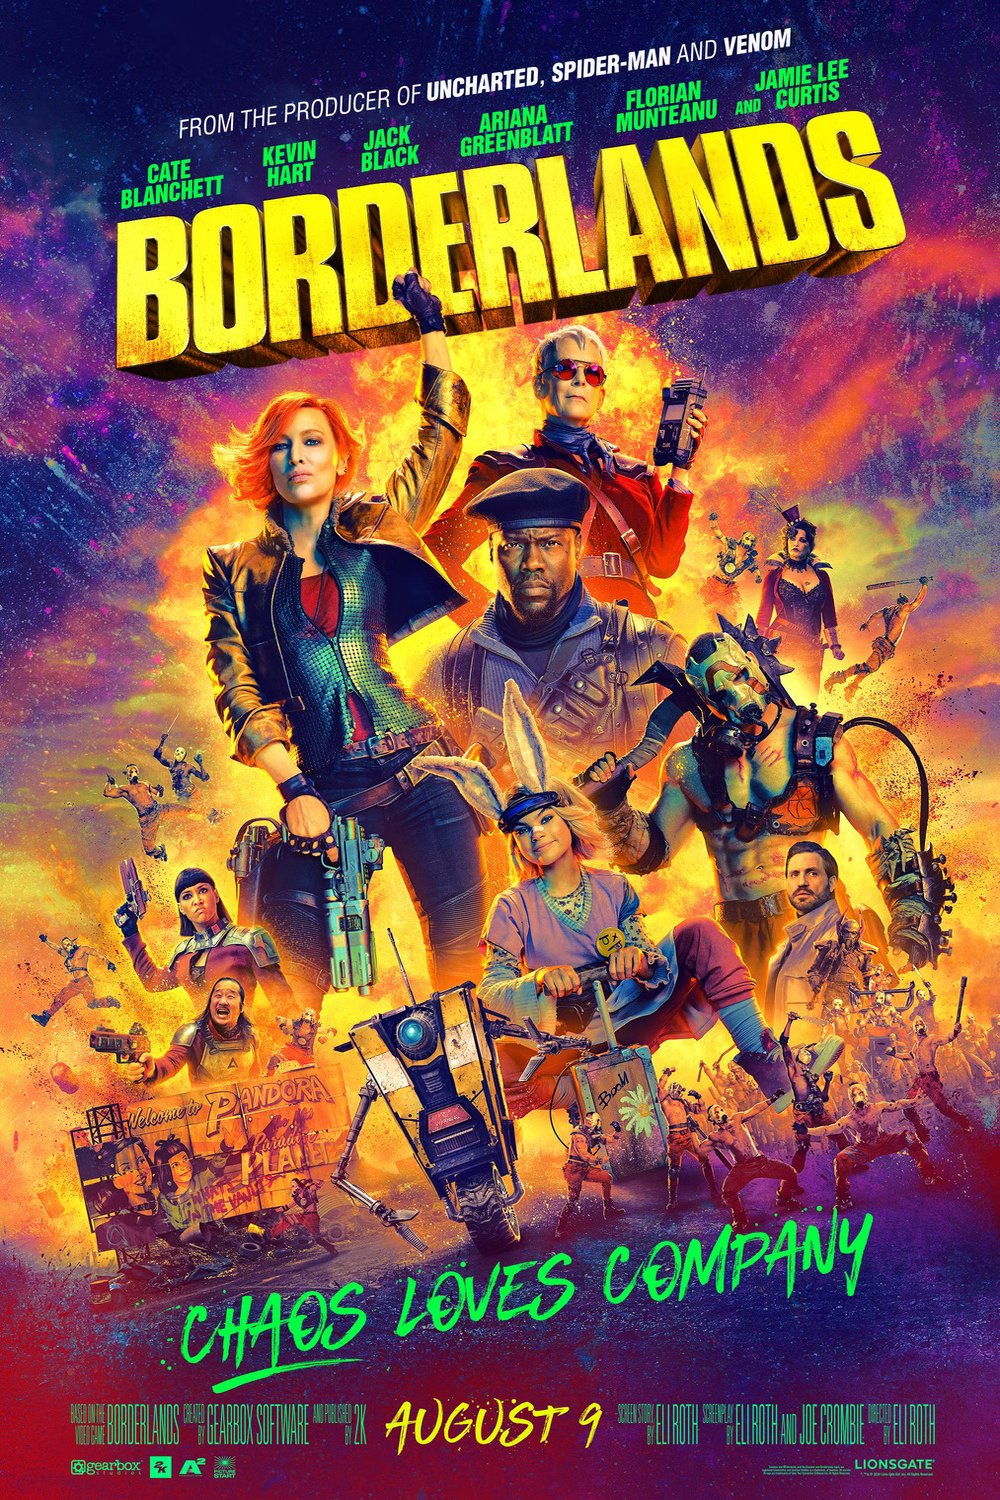 Poster of the movie Borderlands